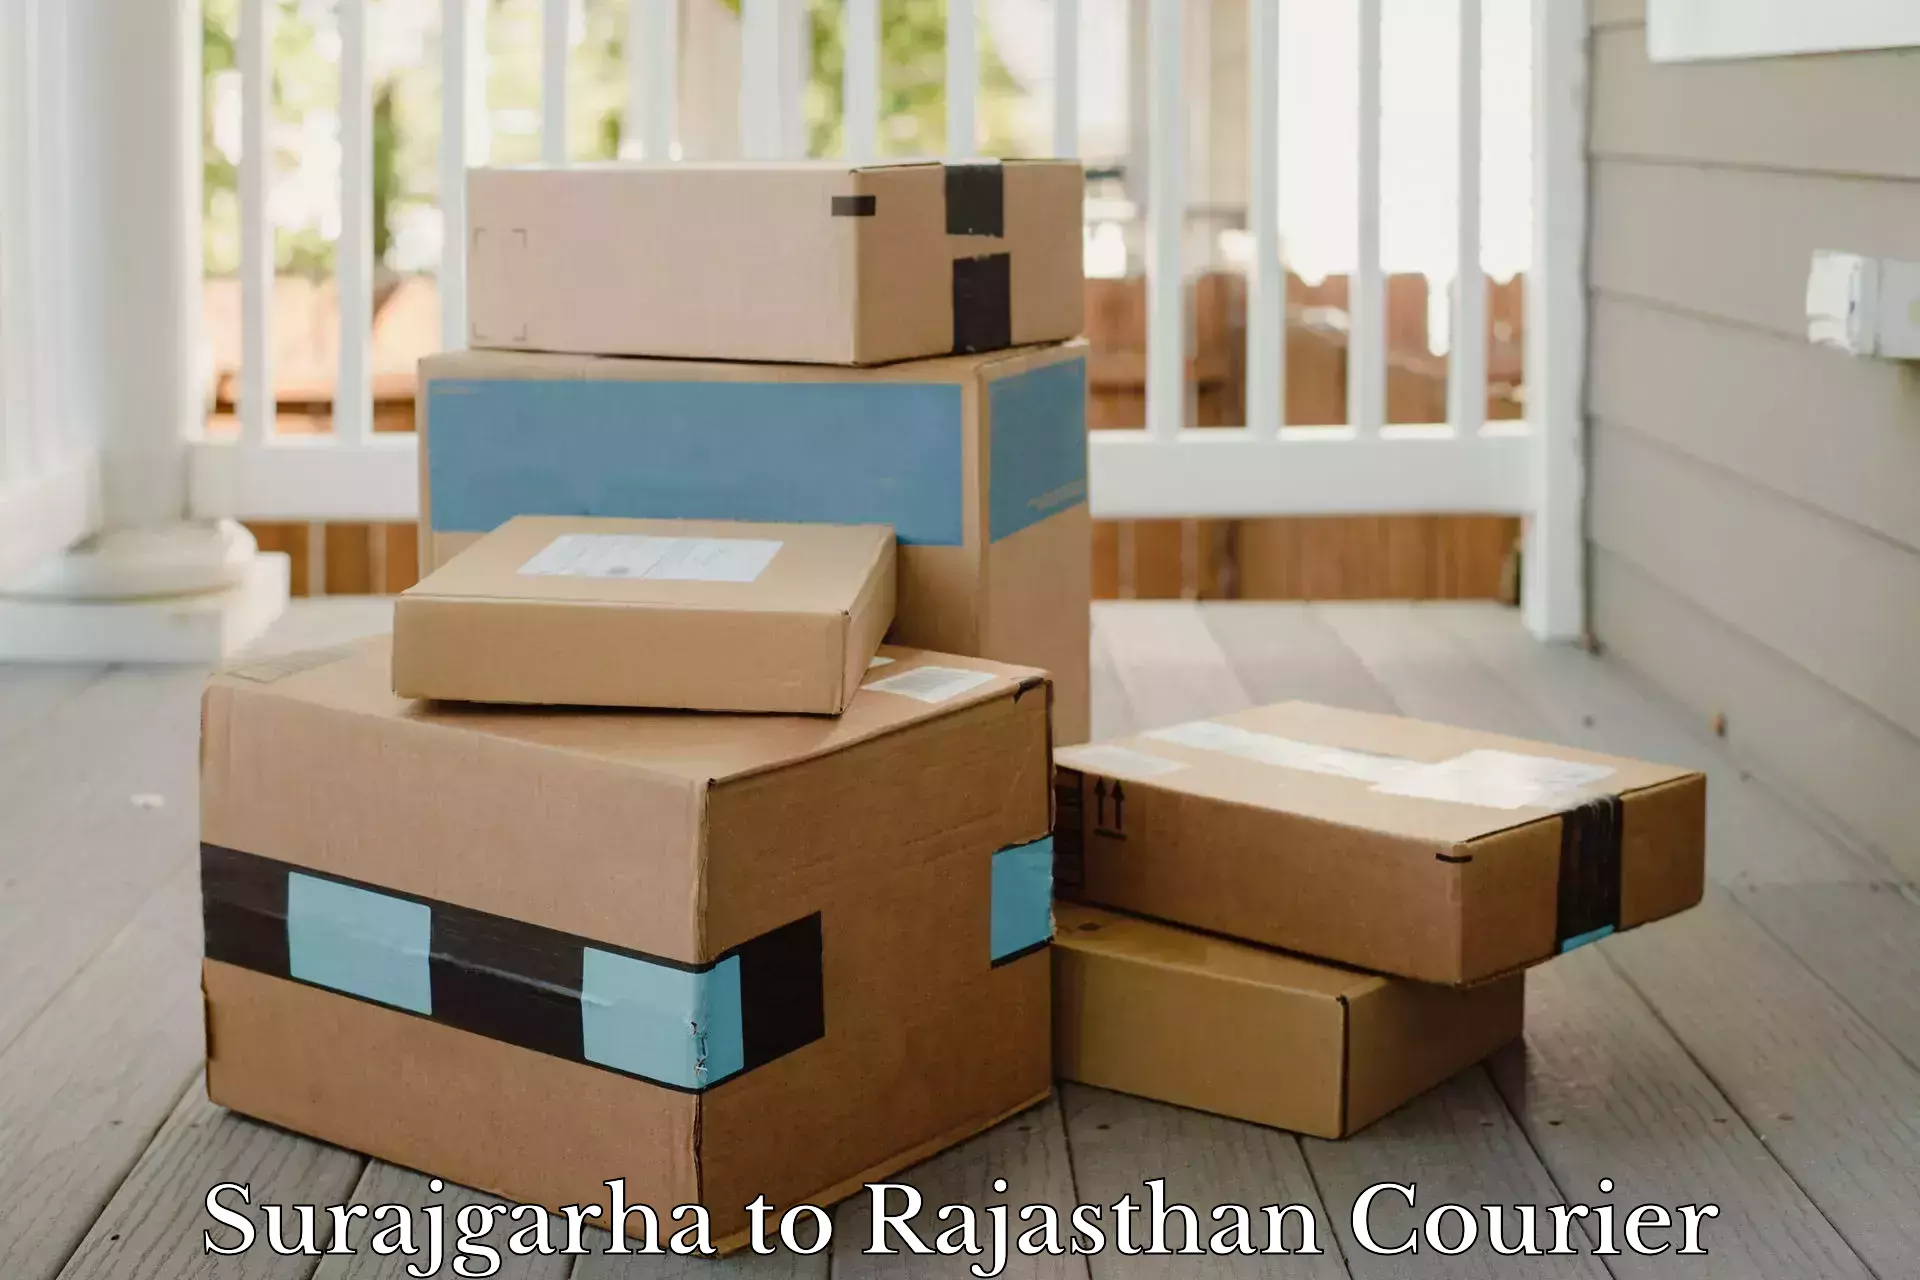 Multi-national courier services Surajgarha to Makrana